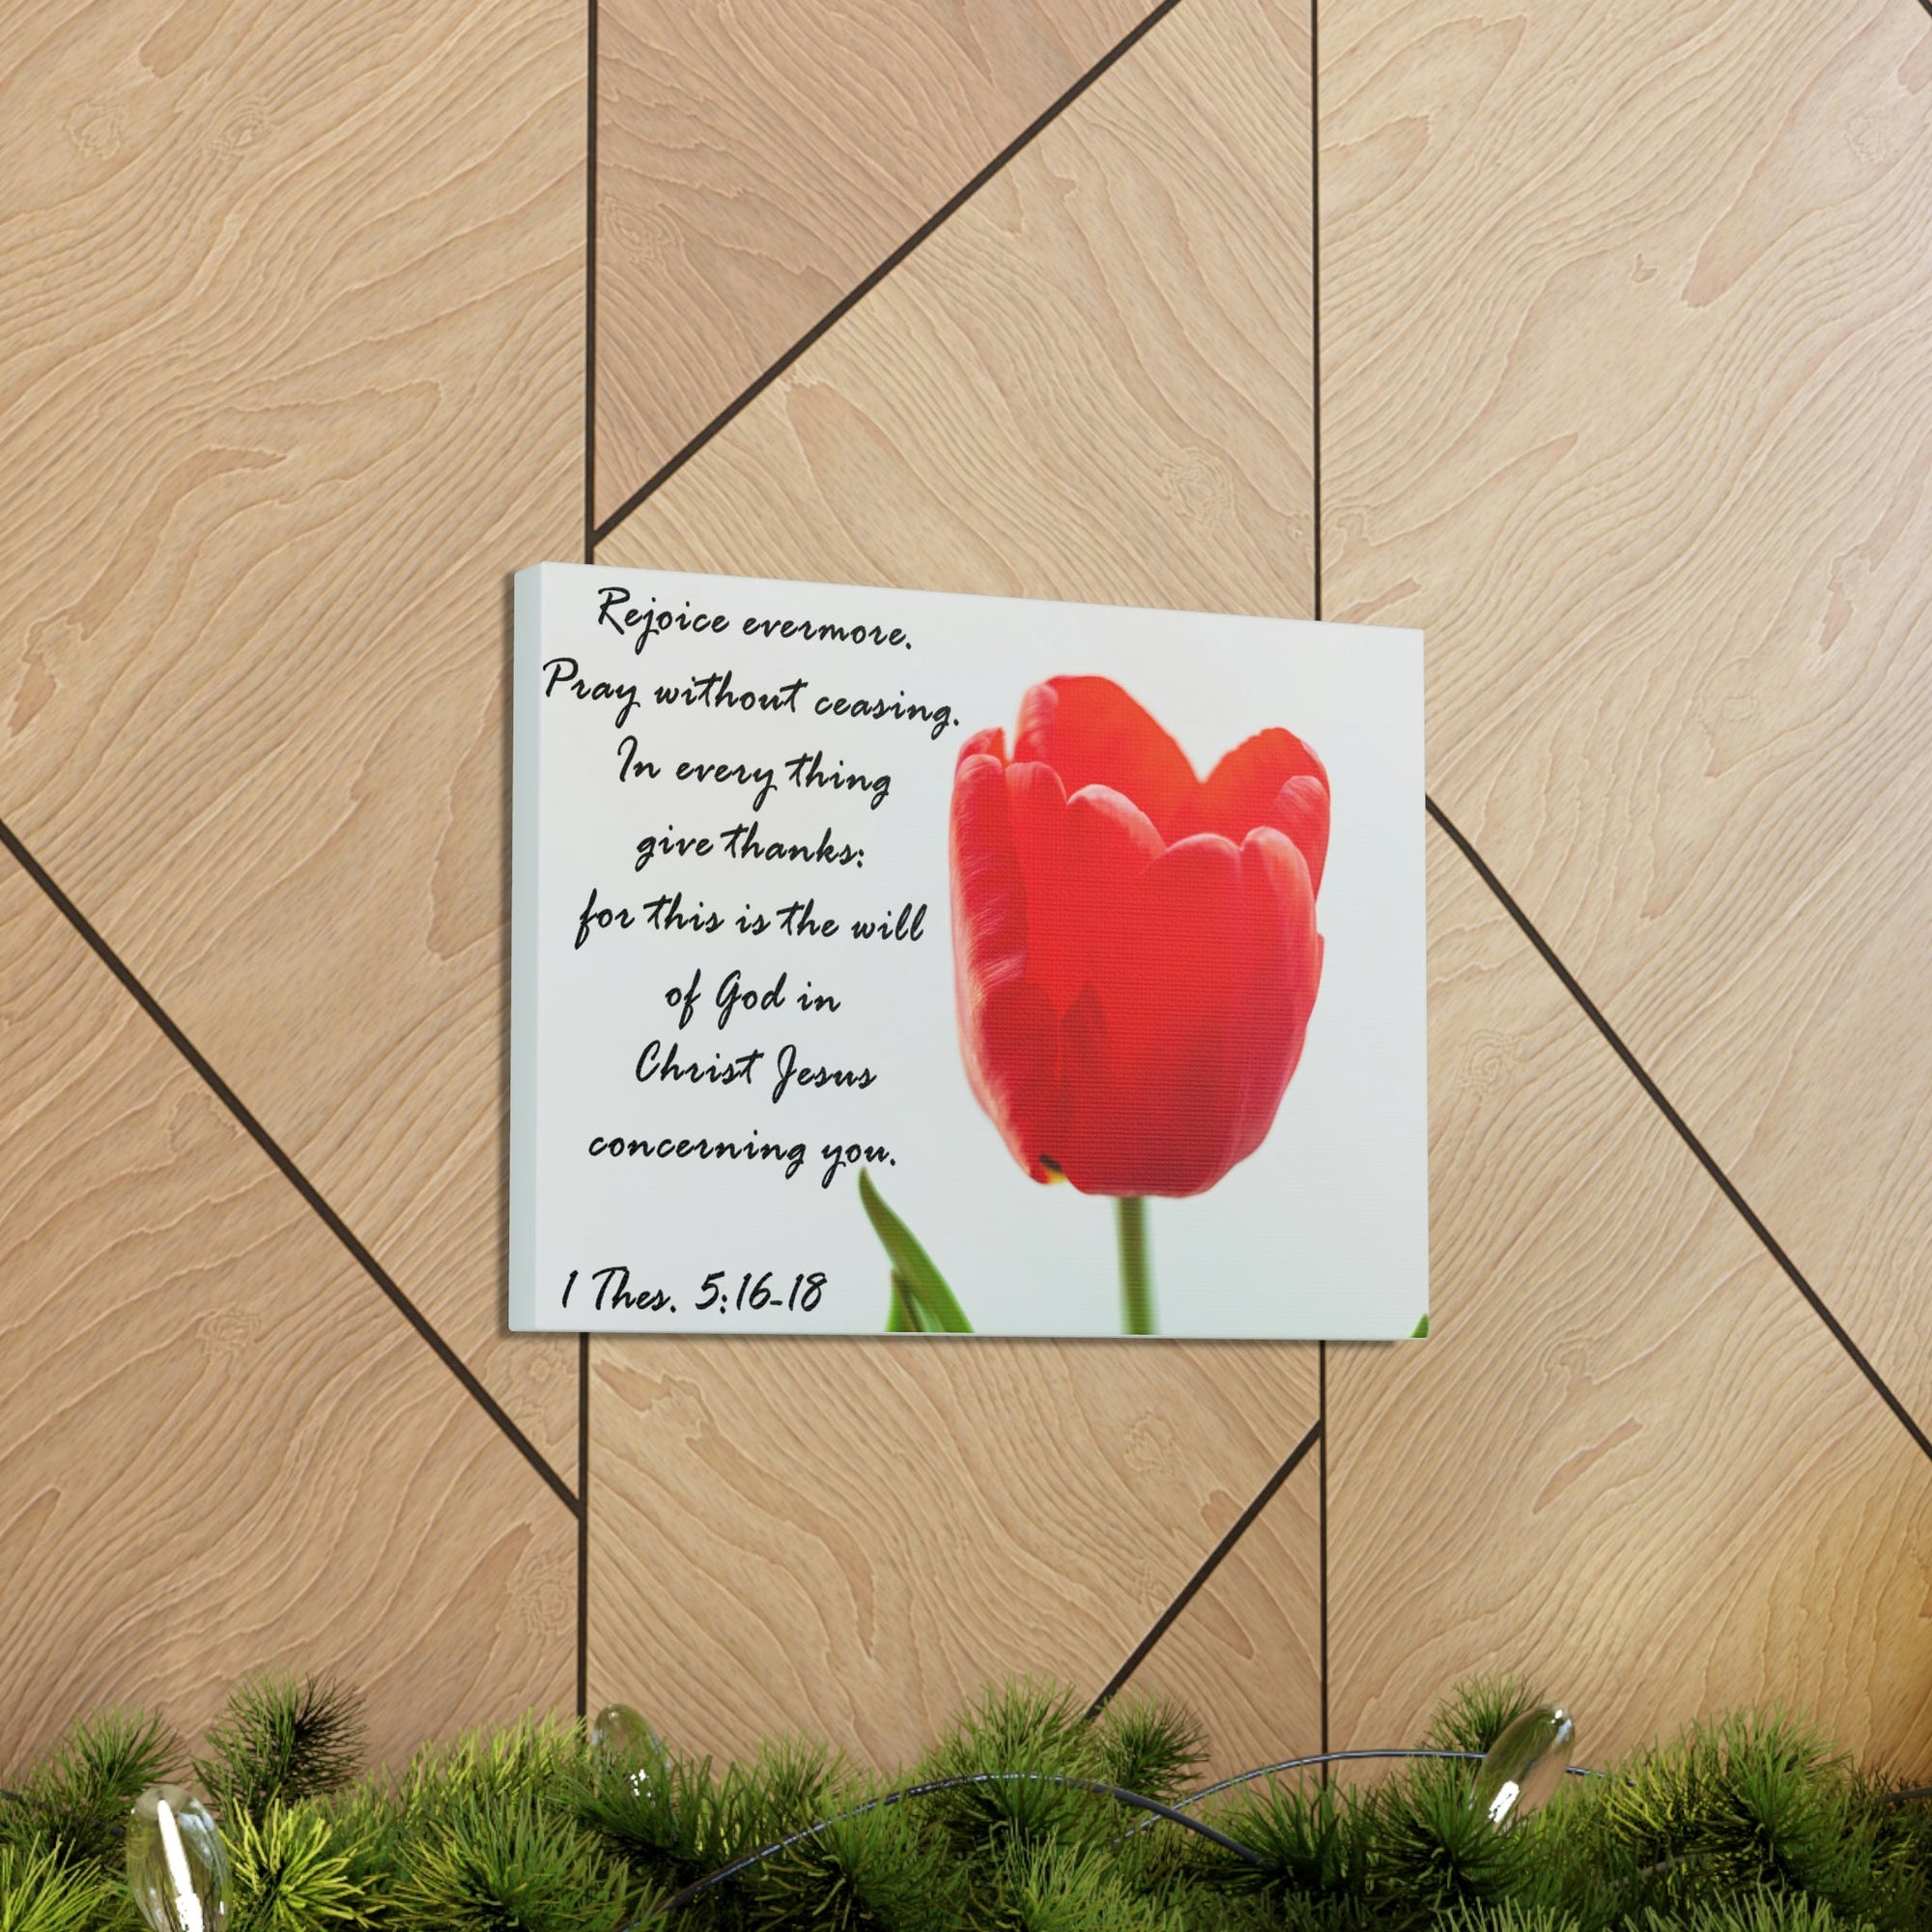 Scripture Walls Rejoice Evermore 1 Thes. 5:17 Bible Verse Canvas Christian Wall Art Ready to Hang Unframed-Express Your Love Gifts